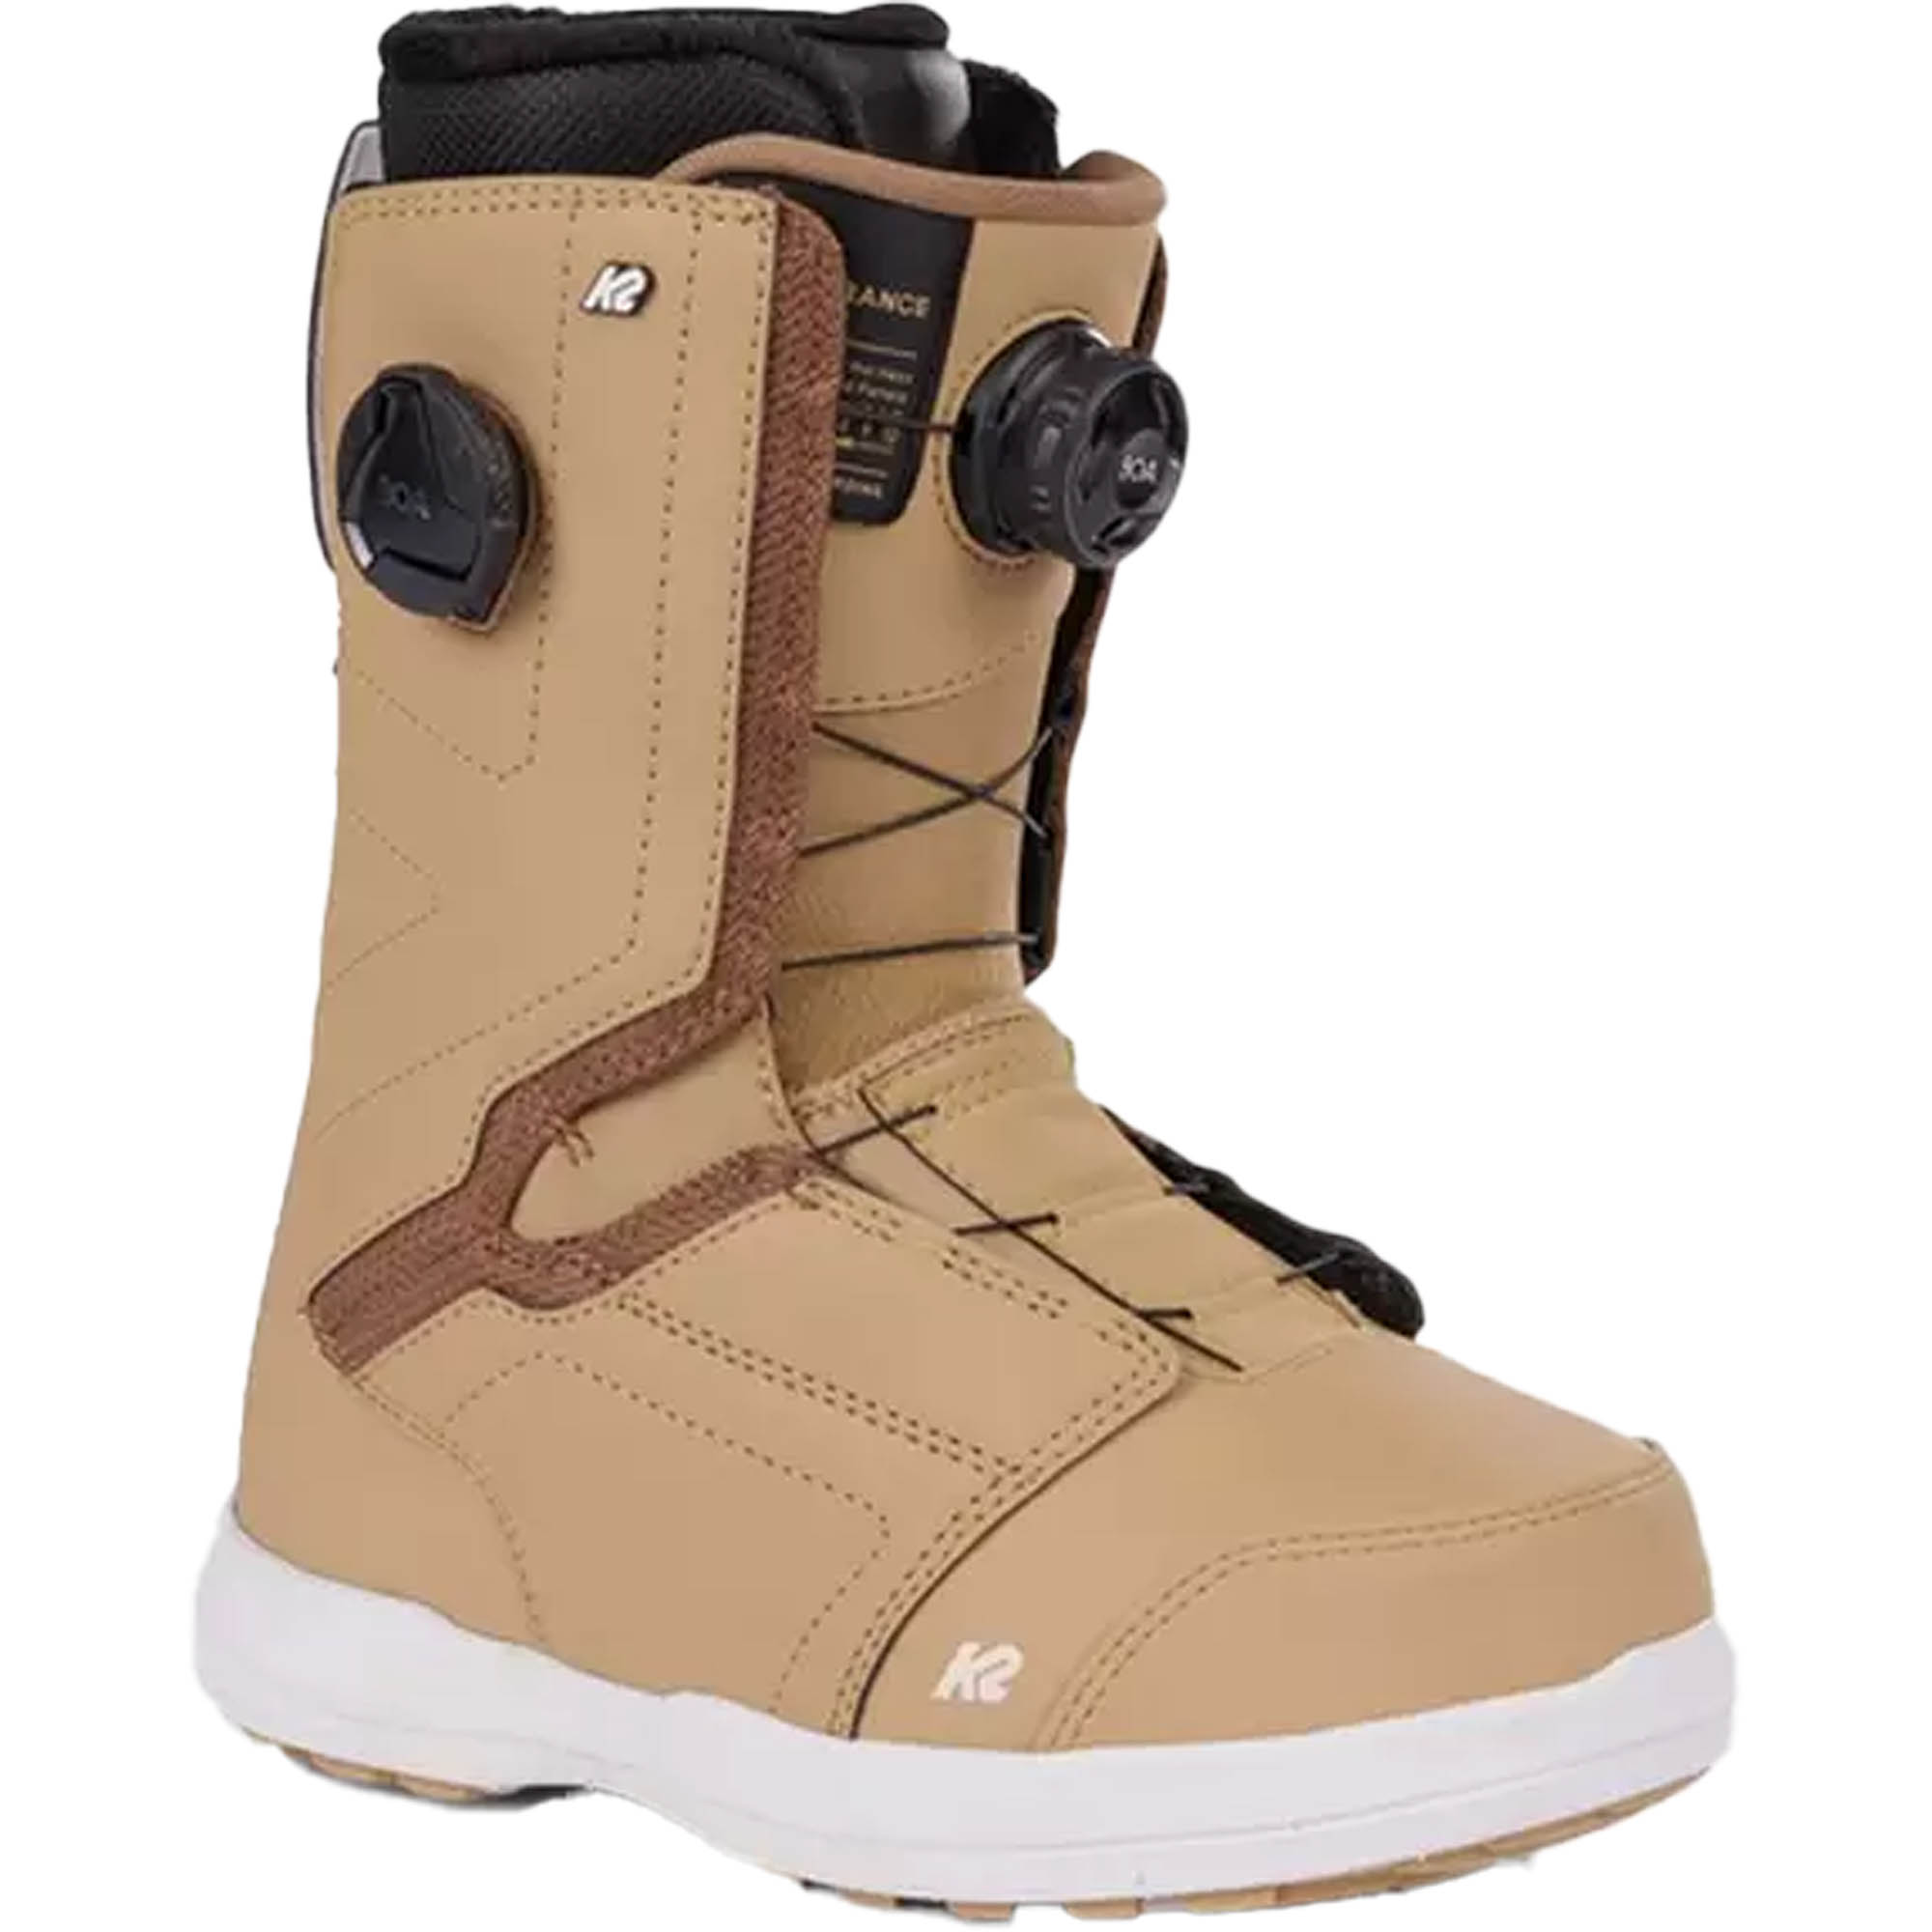 K2 Trance Women's BOA Fit System Snowboard Boots